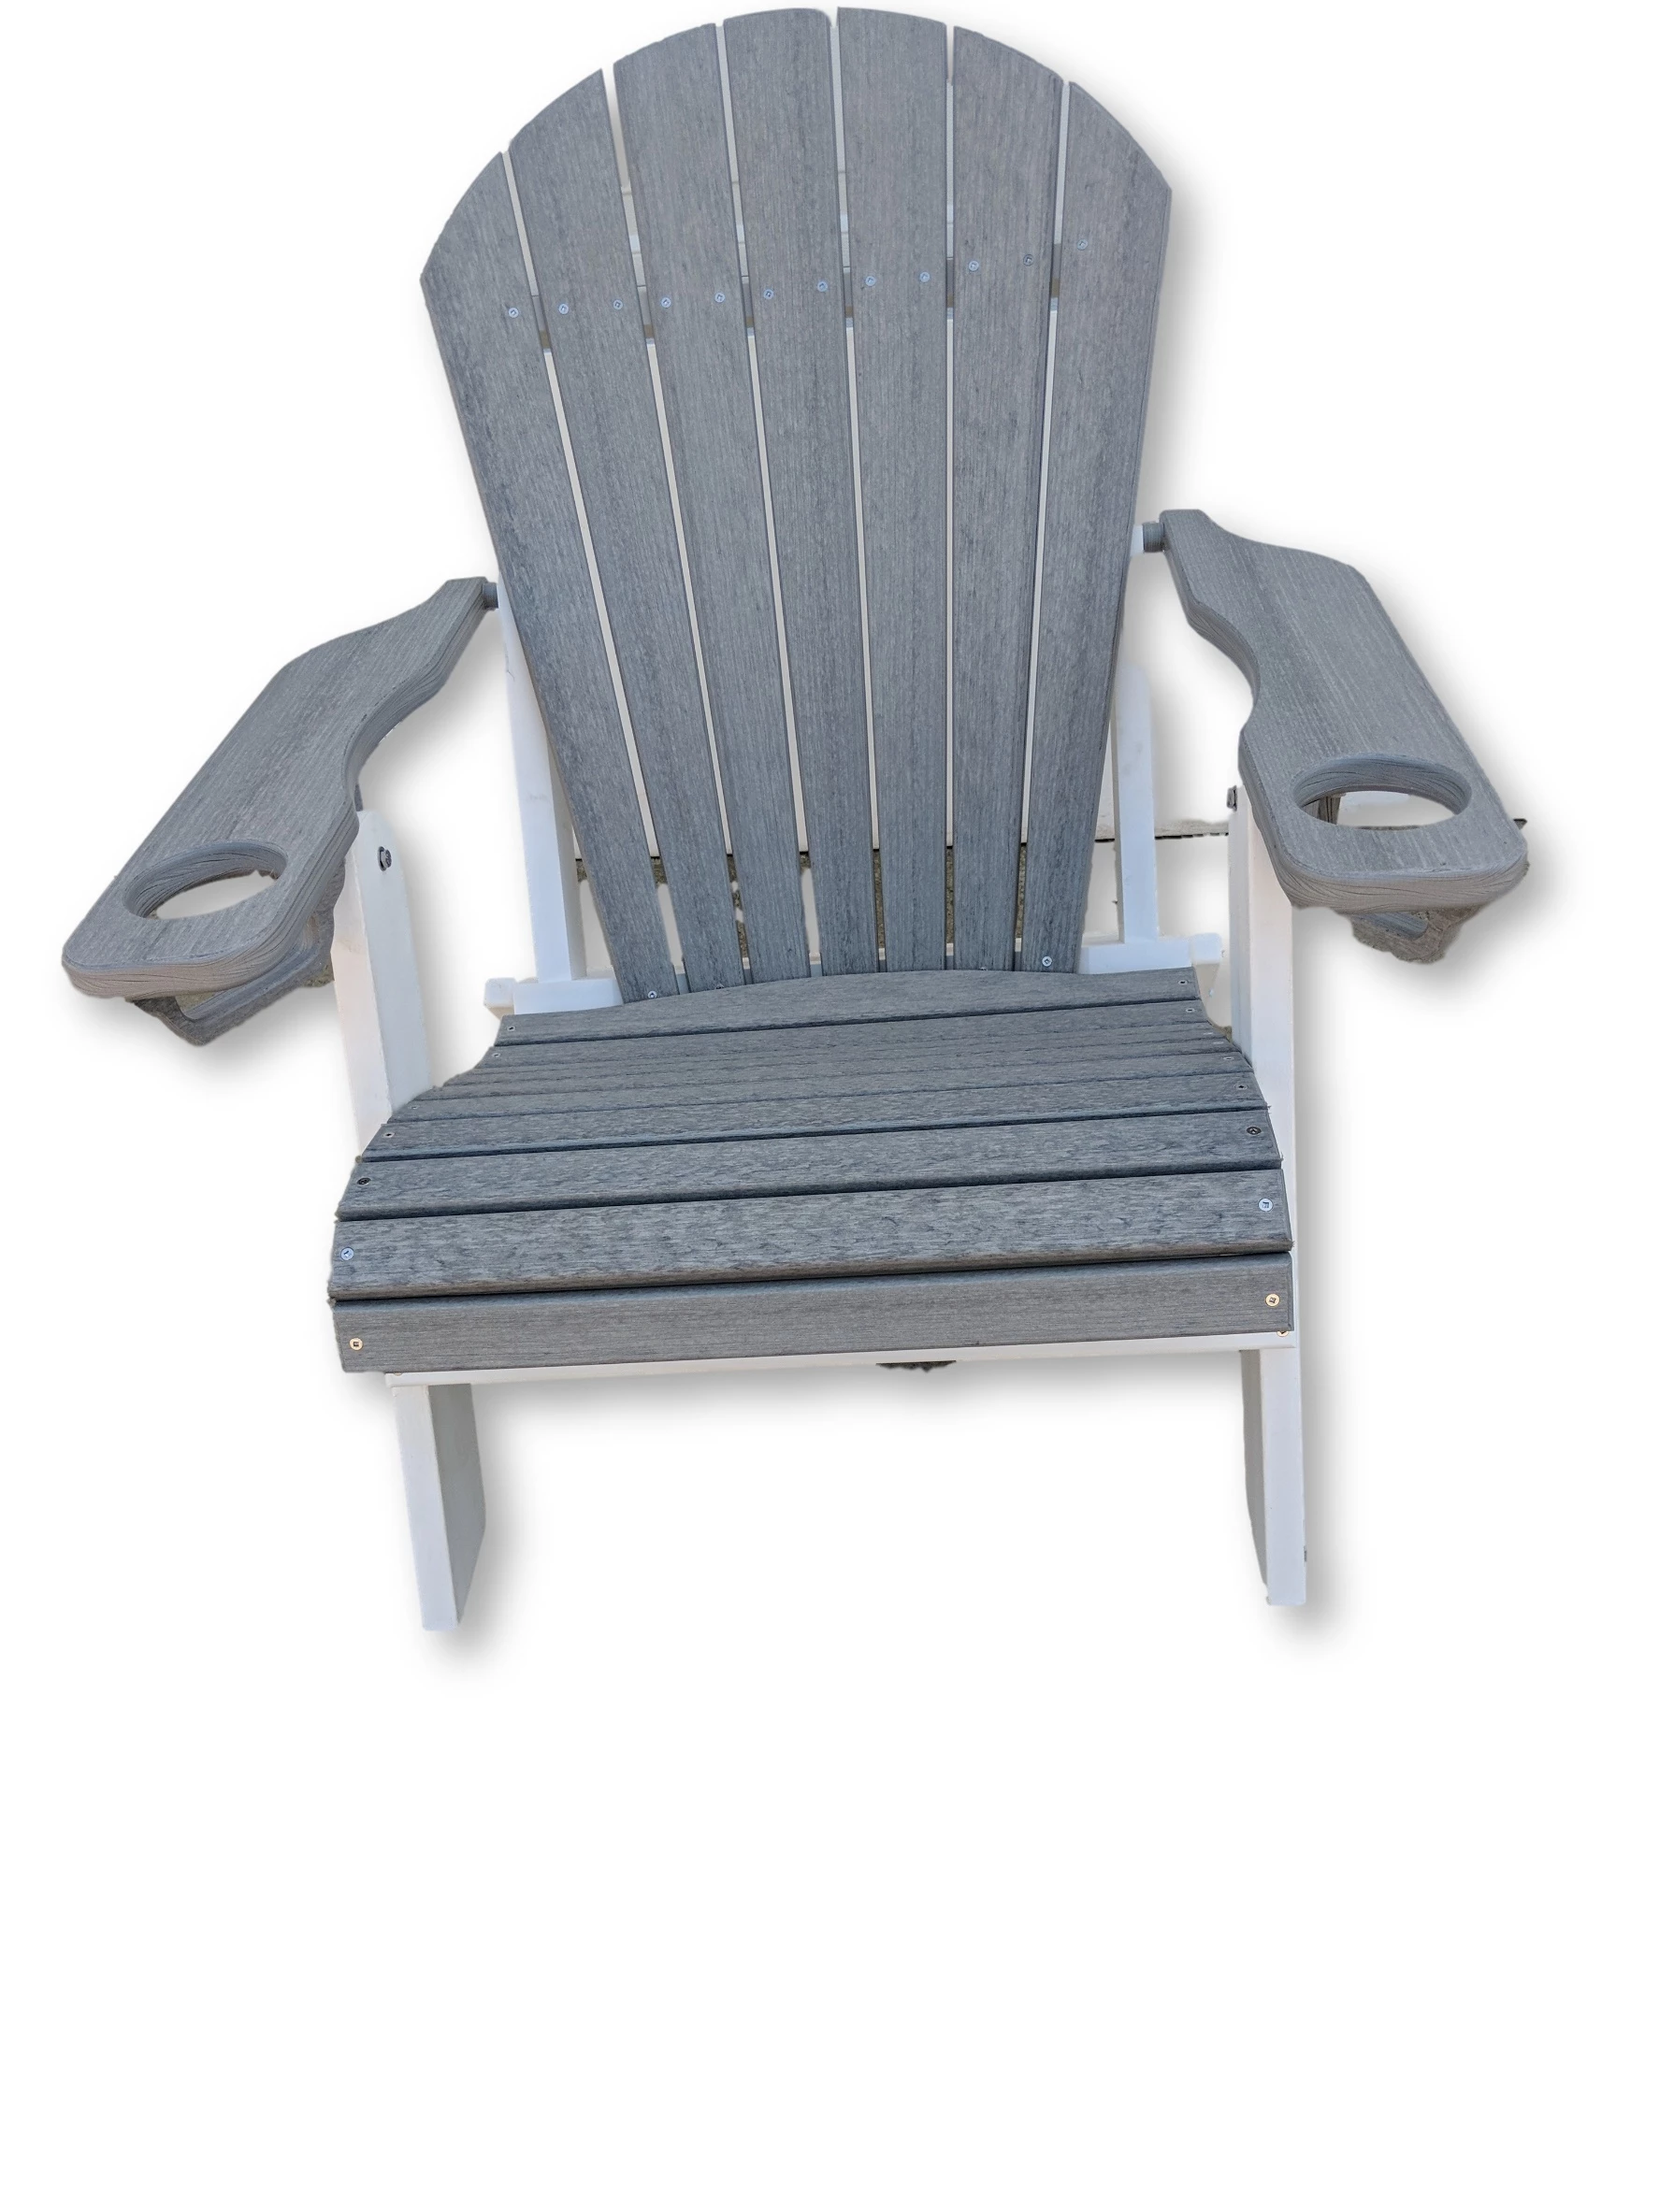 Driftwood White Folding Adirondack Chair with Cup Holders